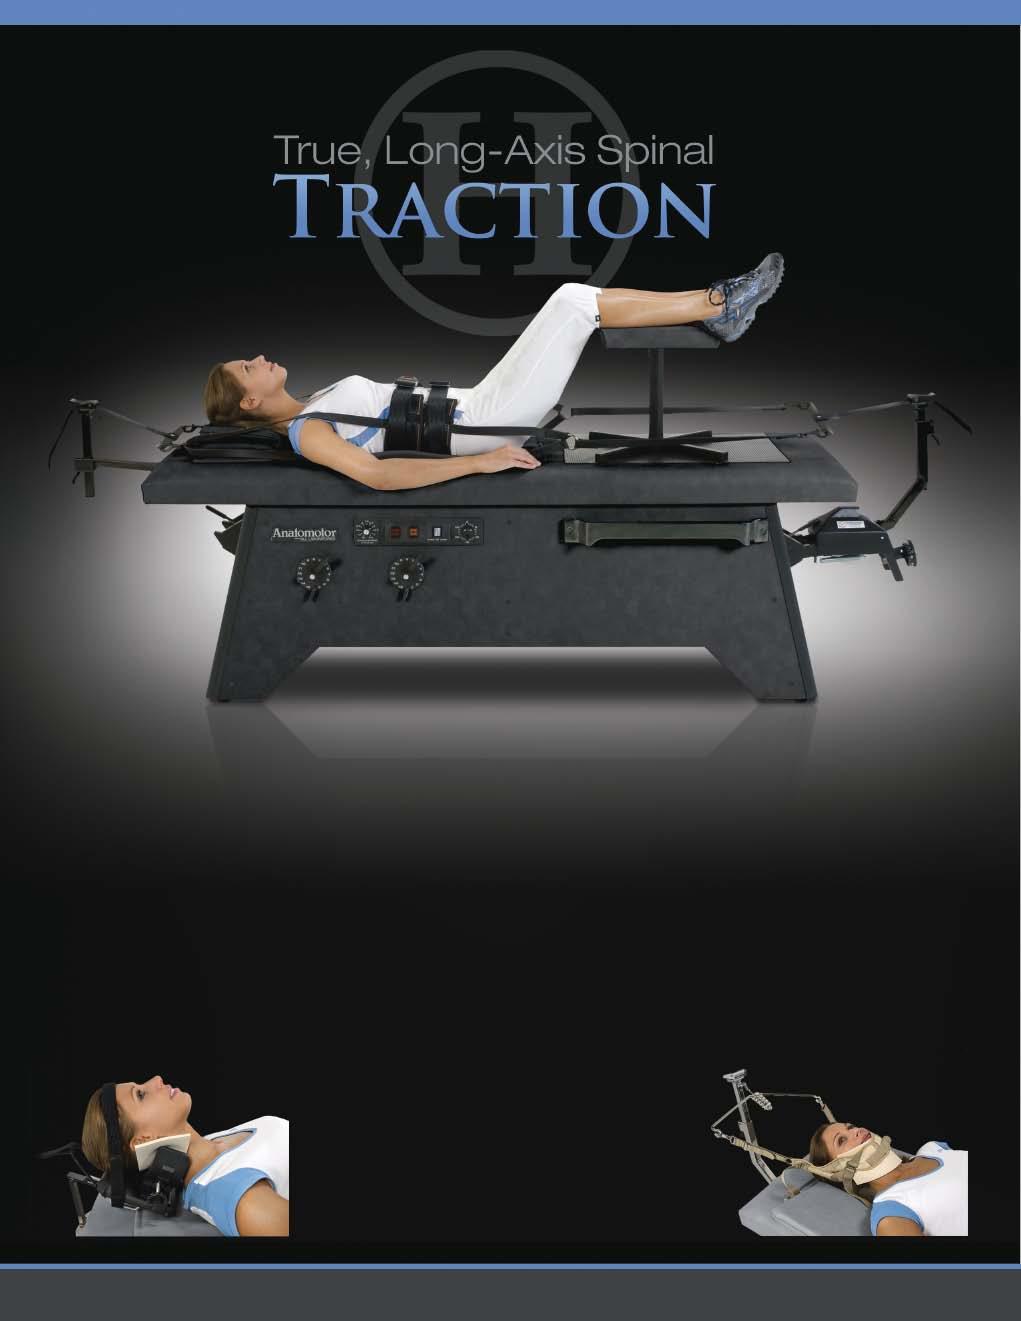 Shown in Shadow The Effective Interaction of Traction and Massage Using rolling massage with traction reduces the patient s body friction to the surface of the table top and creates pelvic-tilt,